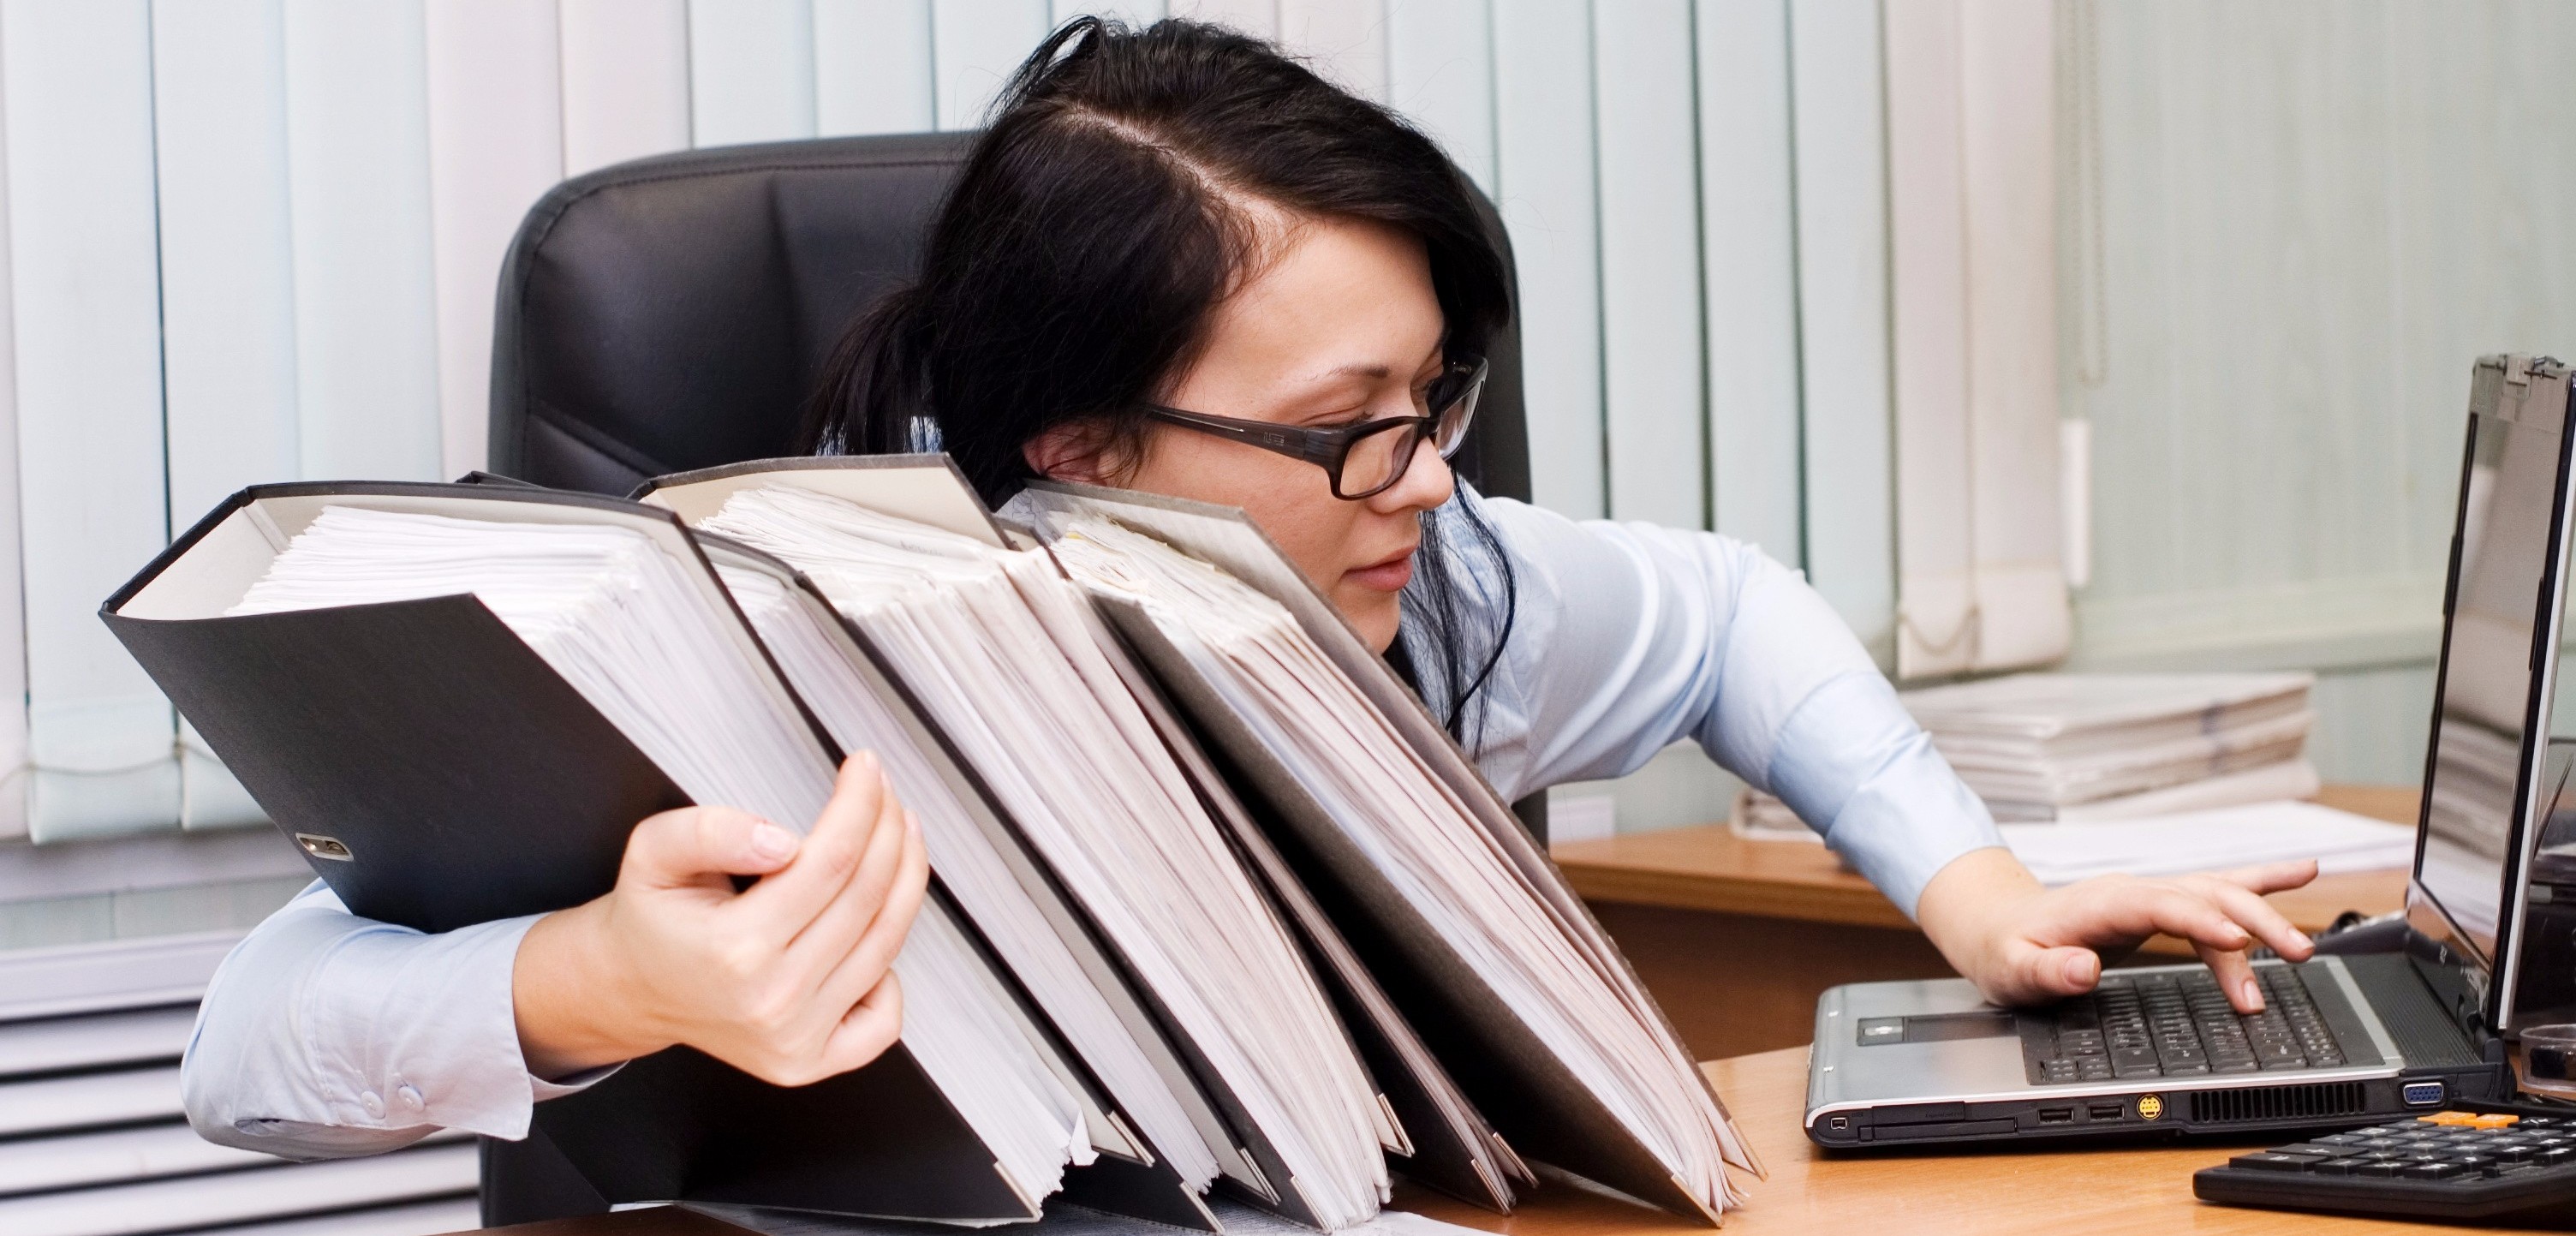 Back Pain? Try these tips for improving your workstation